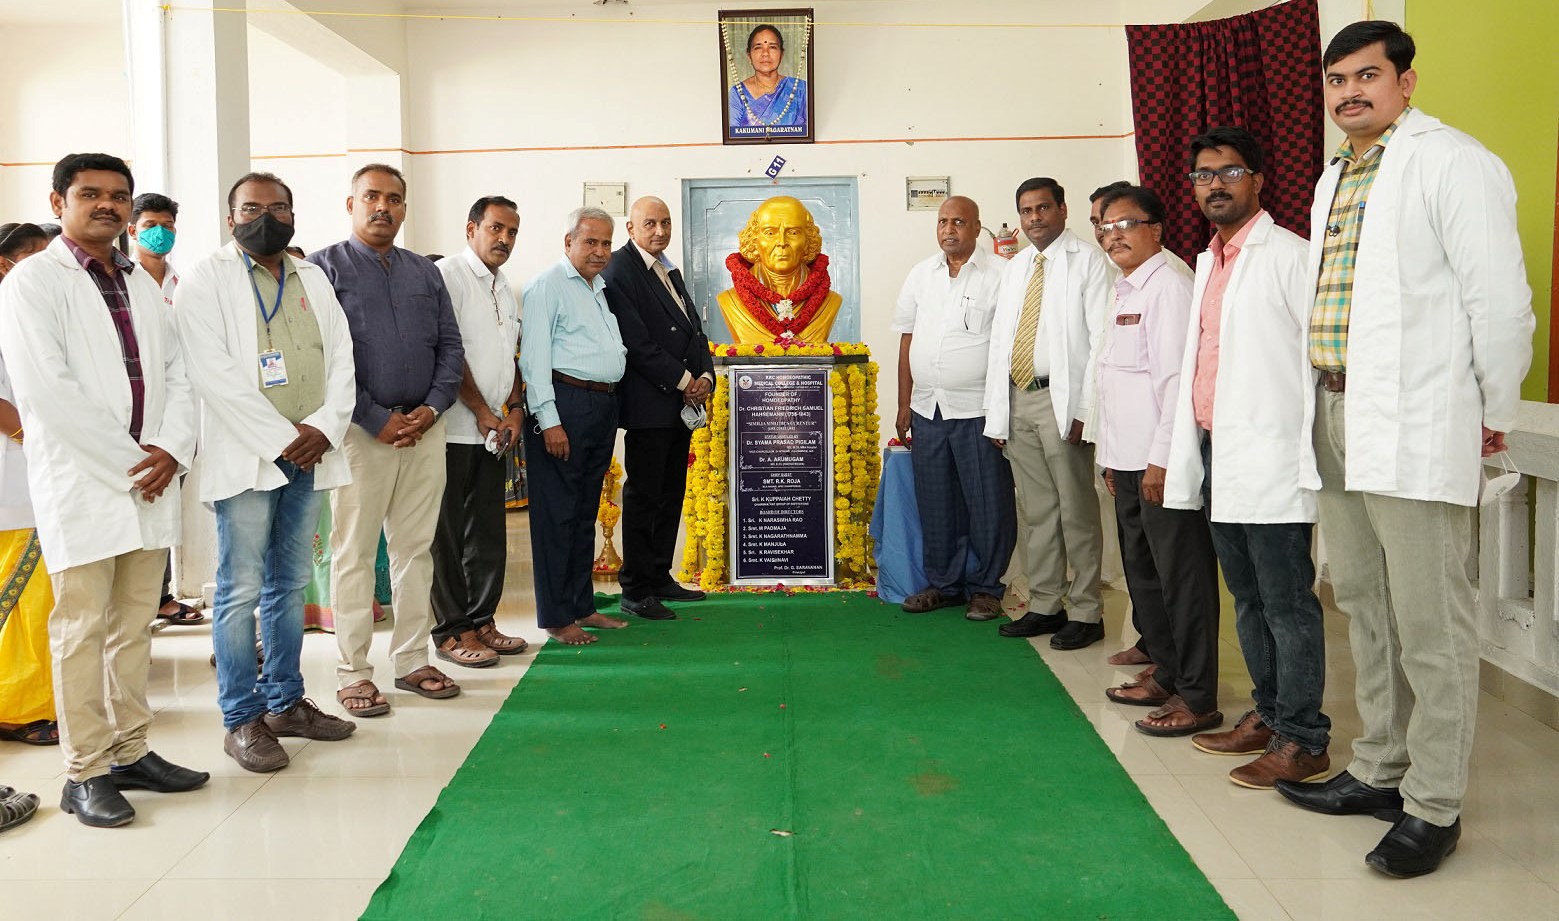 Unveiling of founder of homoeopathy dr. Hahnemann statue by hon'ble vice chancellor of Dr.NTRUHs